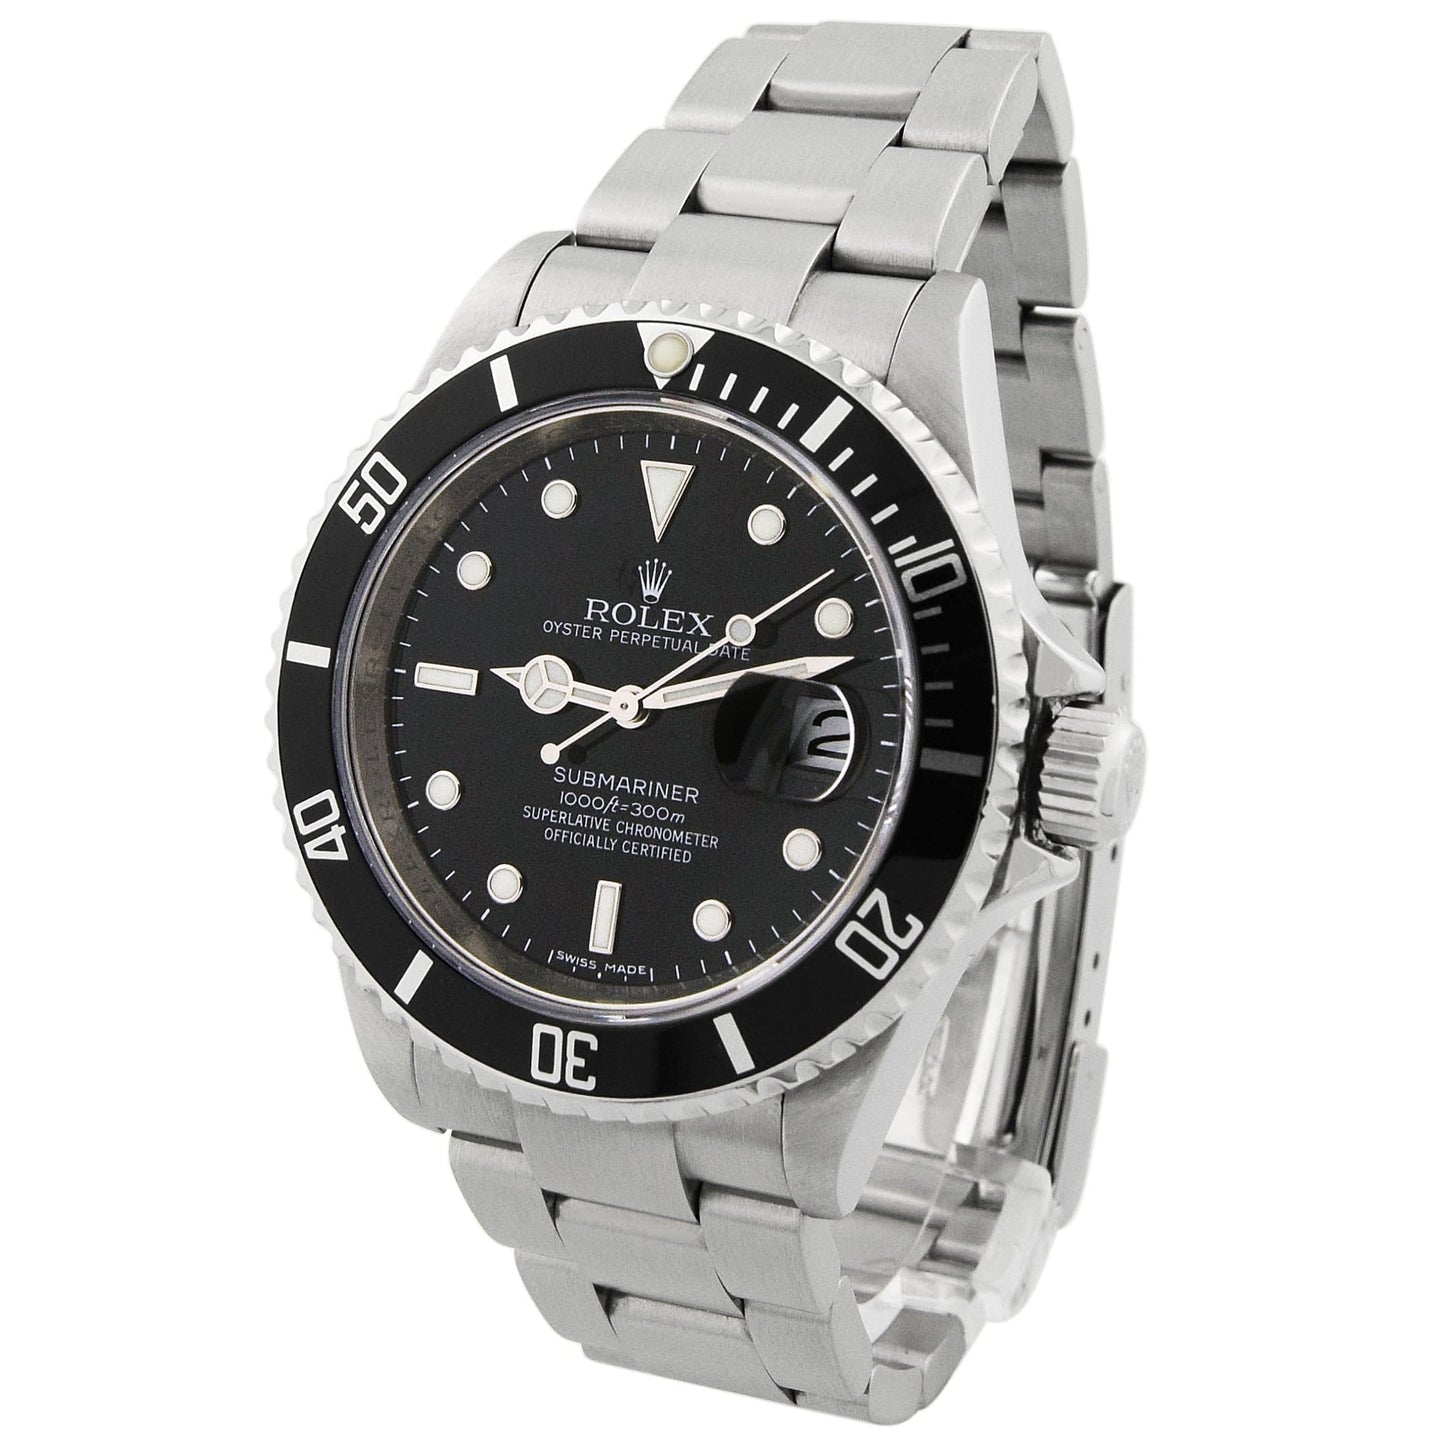 Rolex Submariner Stainless Steel 40mm Black Dot Dial Watch Reference #: 16610